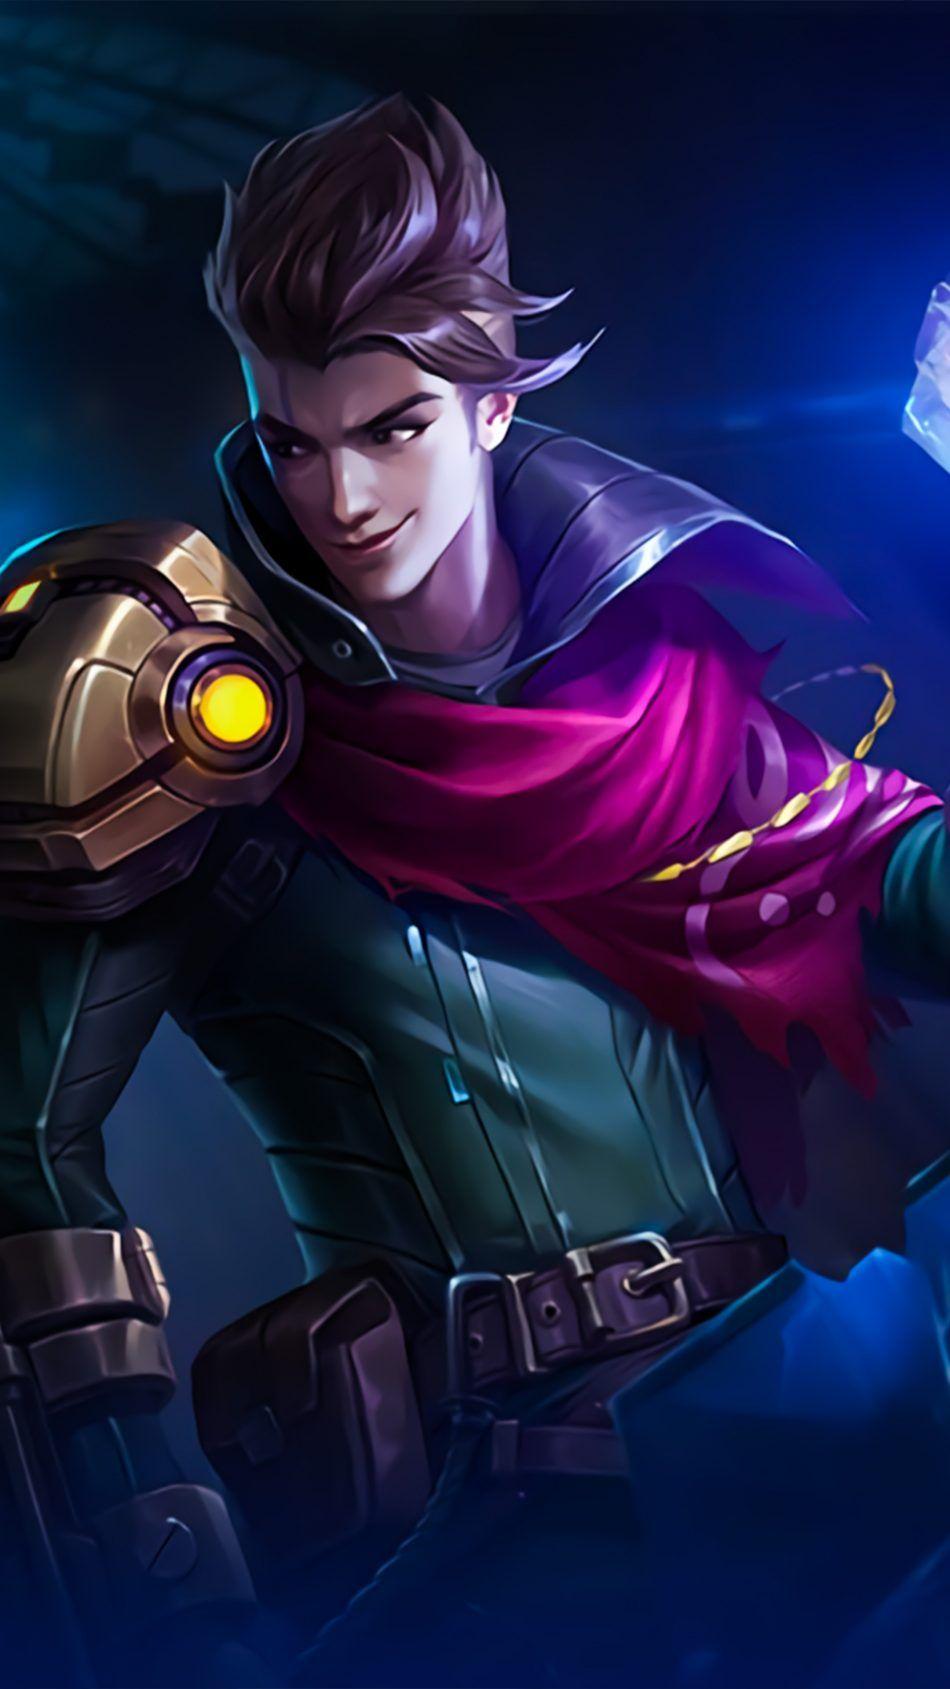 Download Claude Partners In Crime Mobile Legends Free Pure